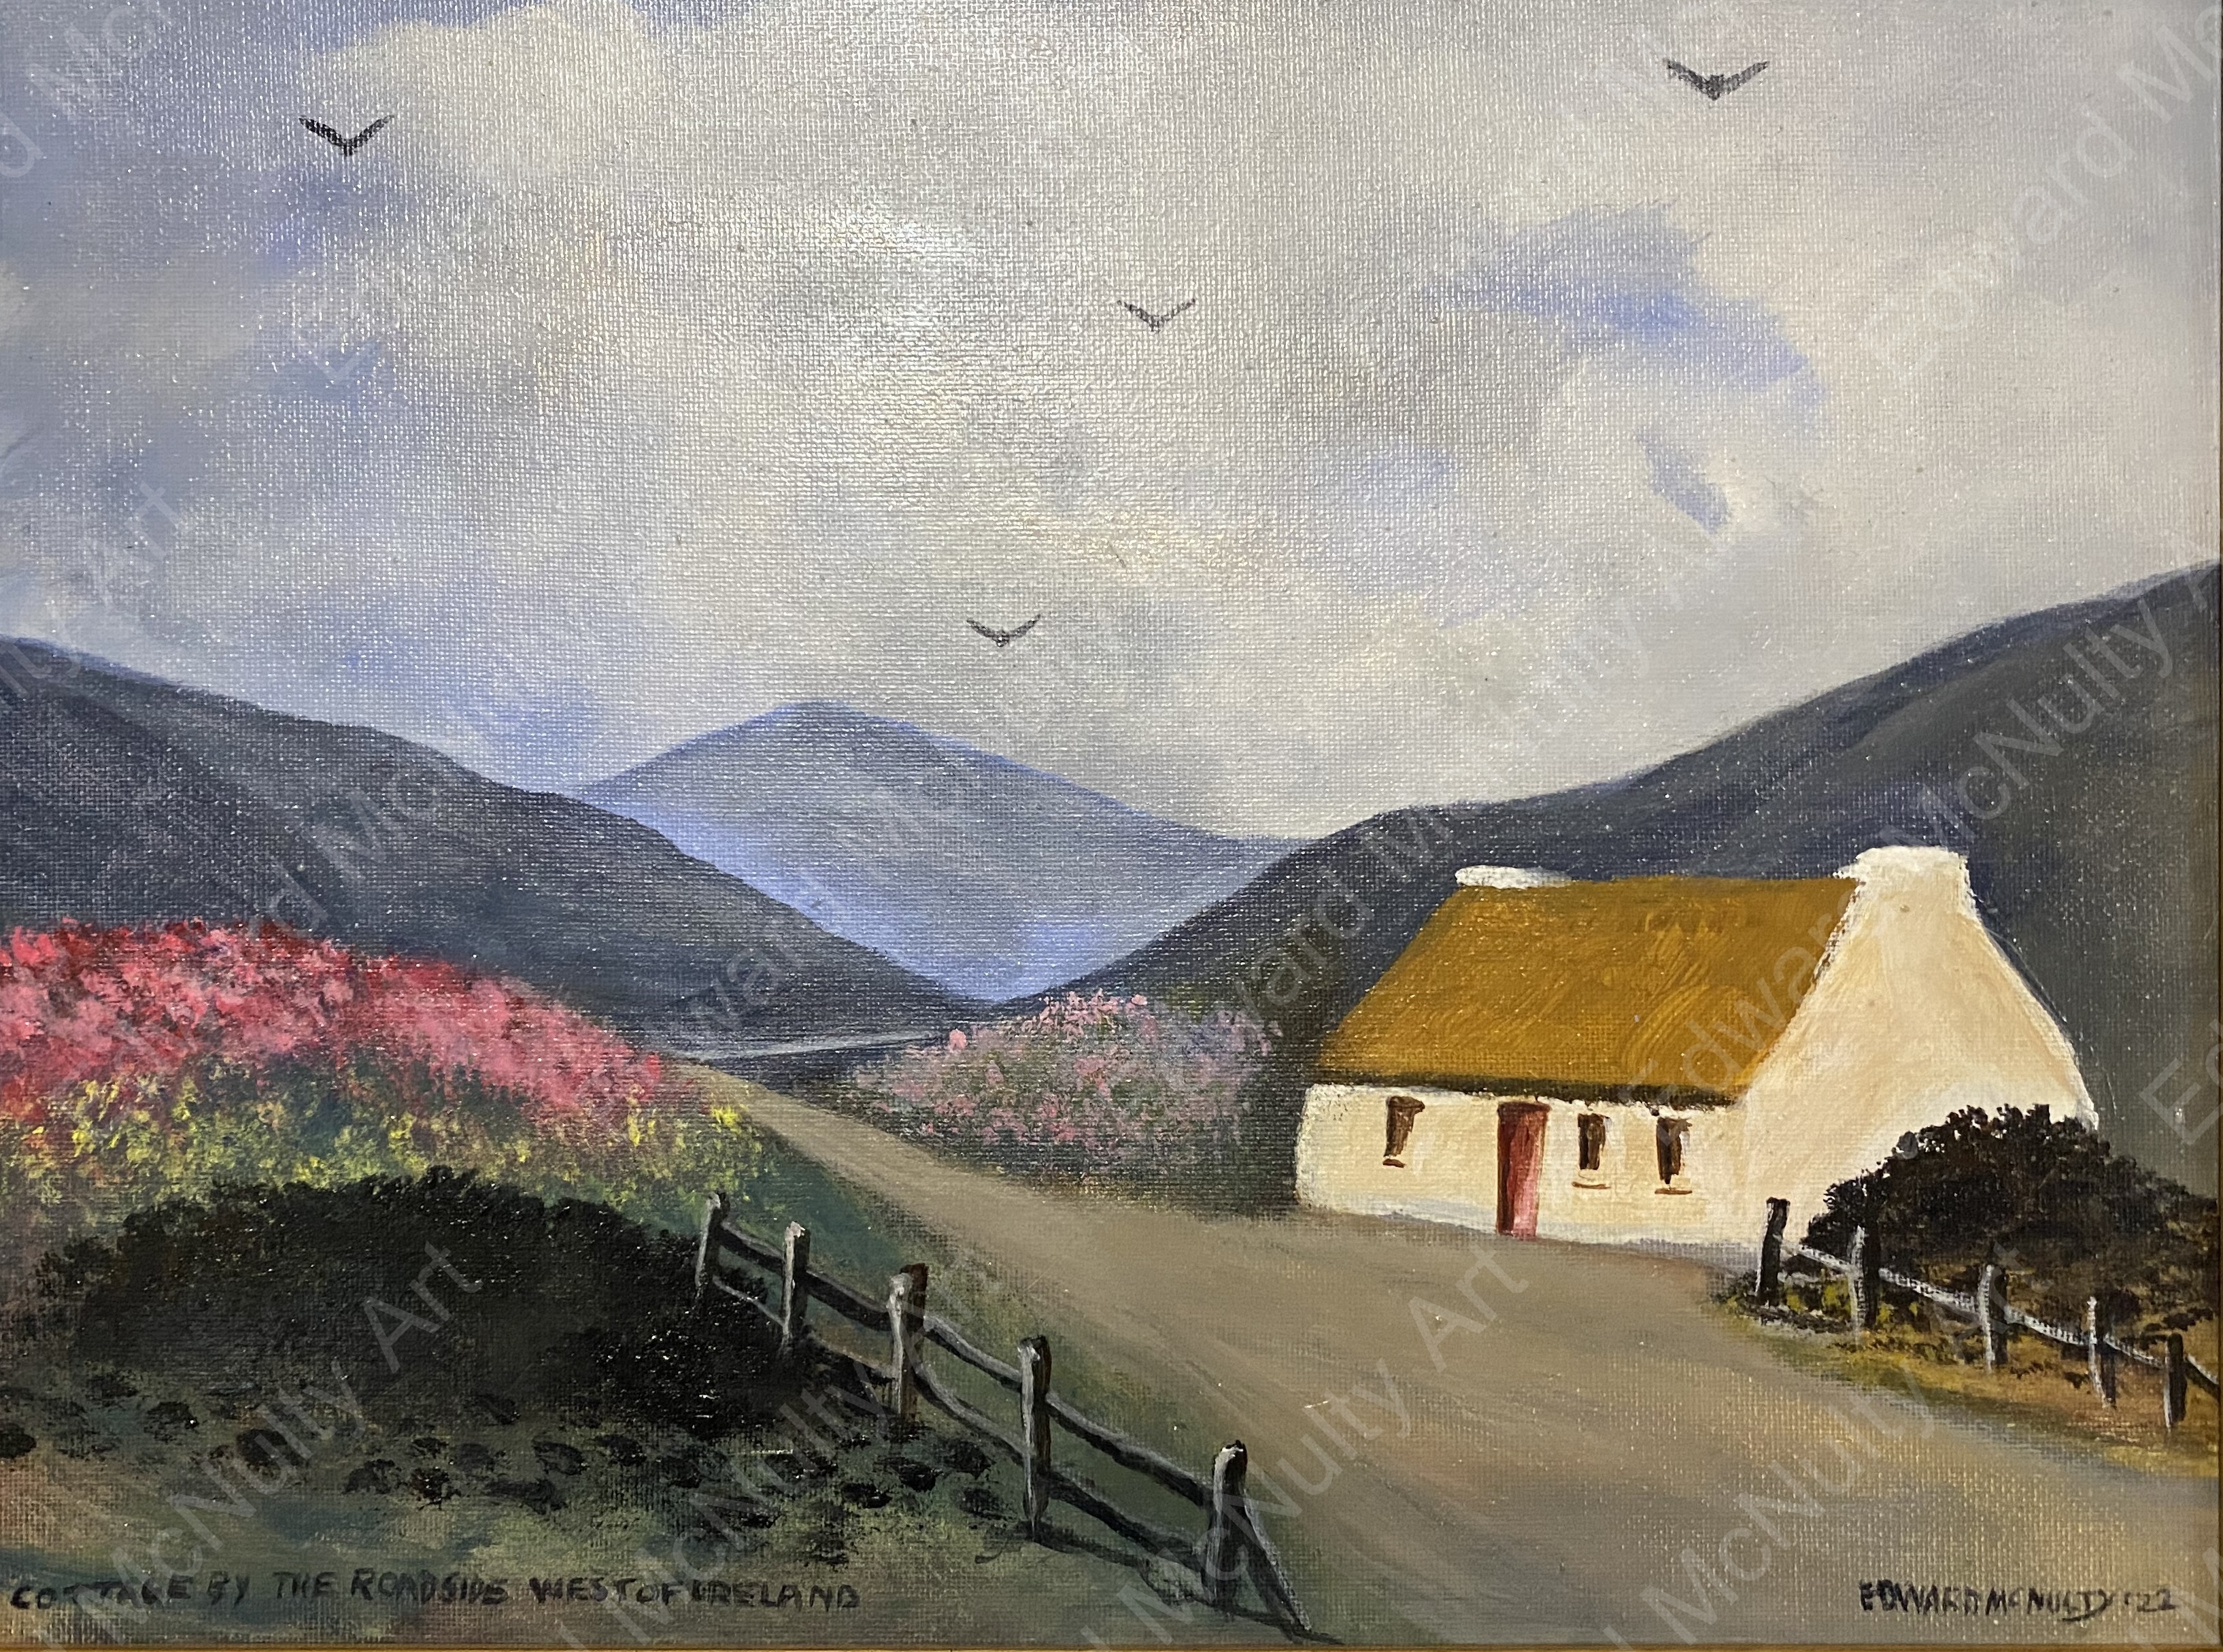 Paul Henry's Cottage by the Roadside, West of Ireland